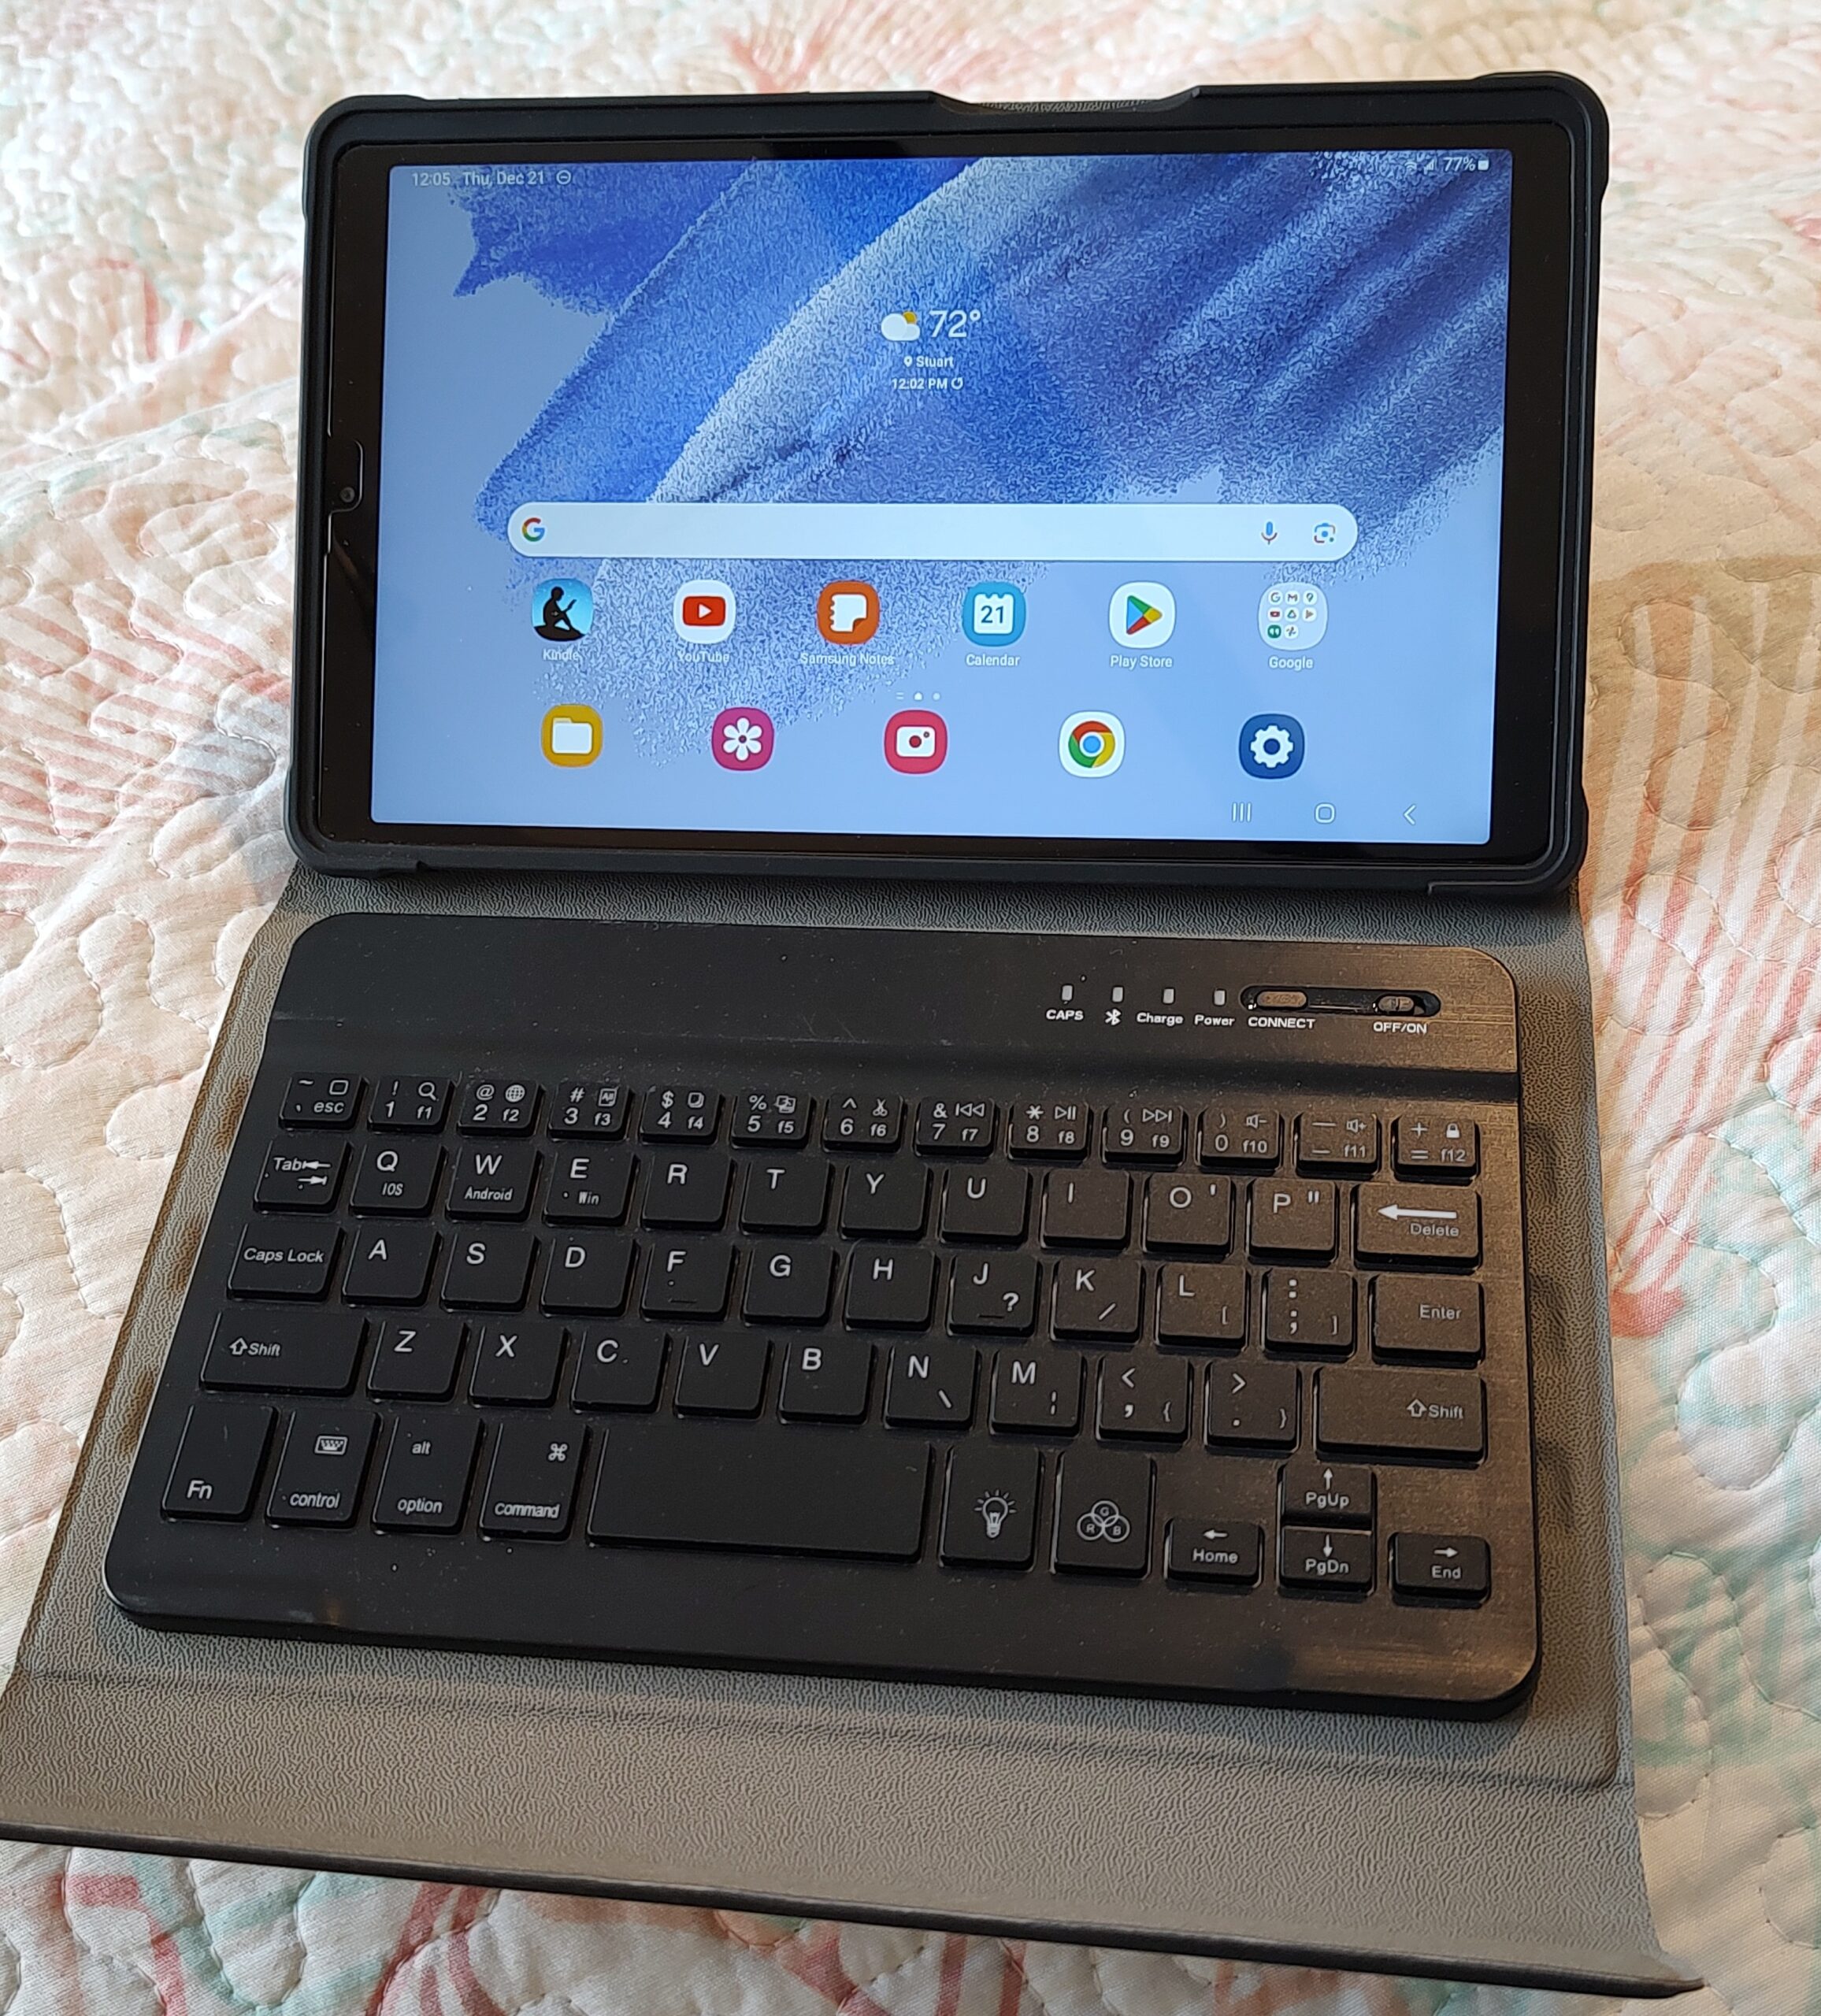 My Samsung Tablet with Keyboard